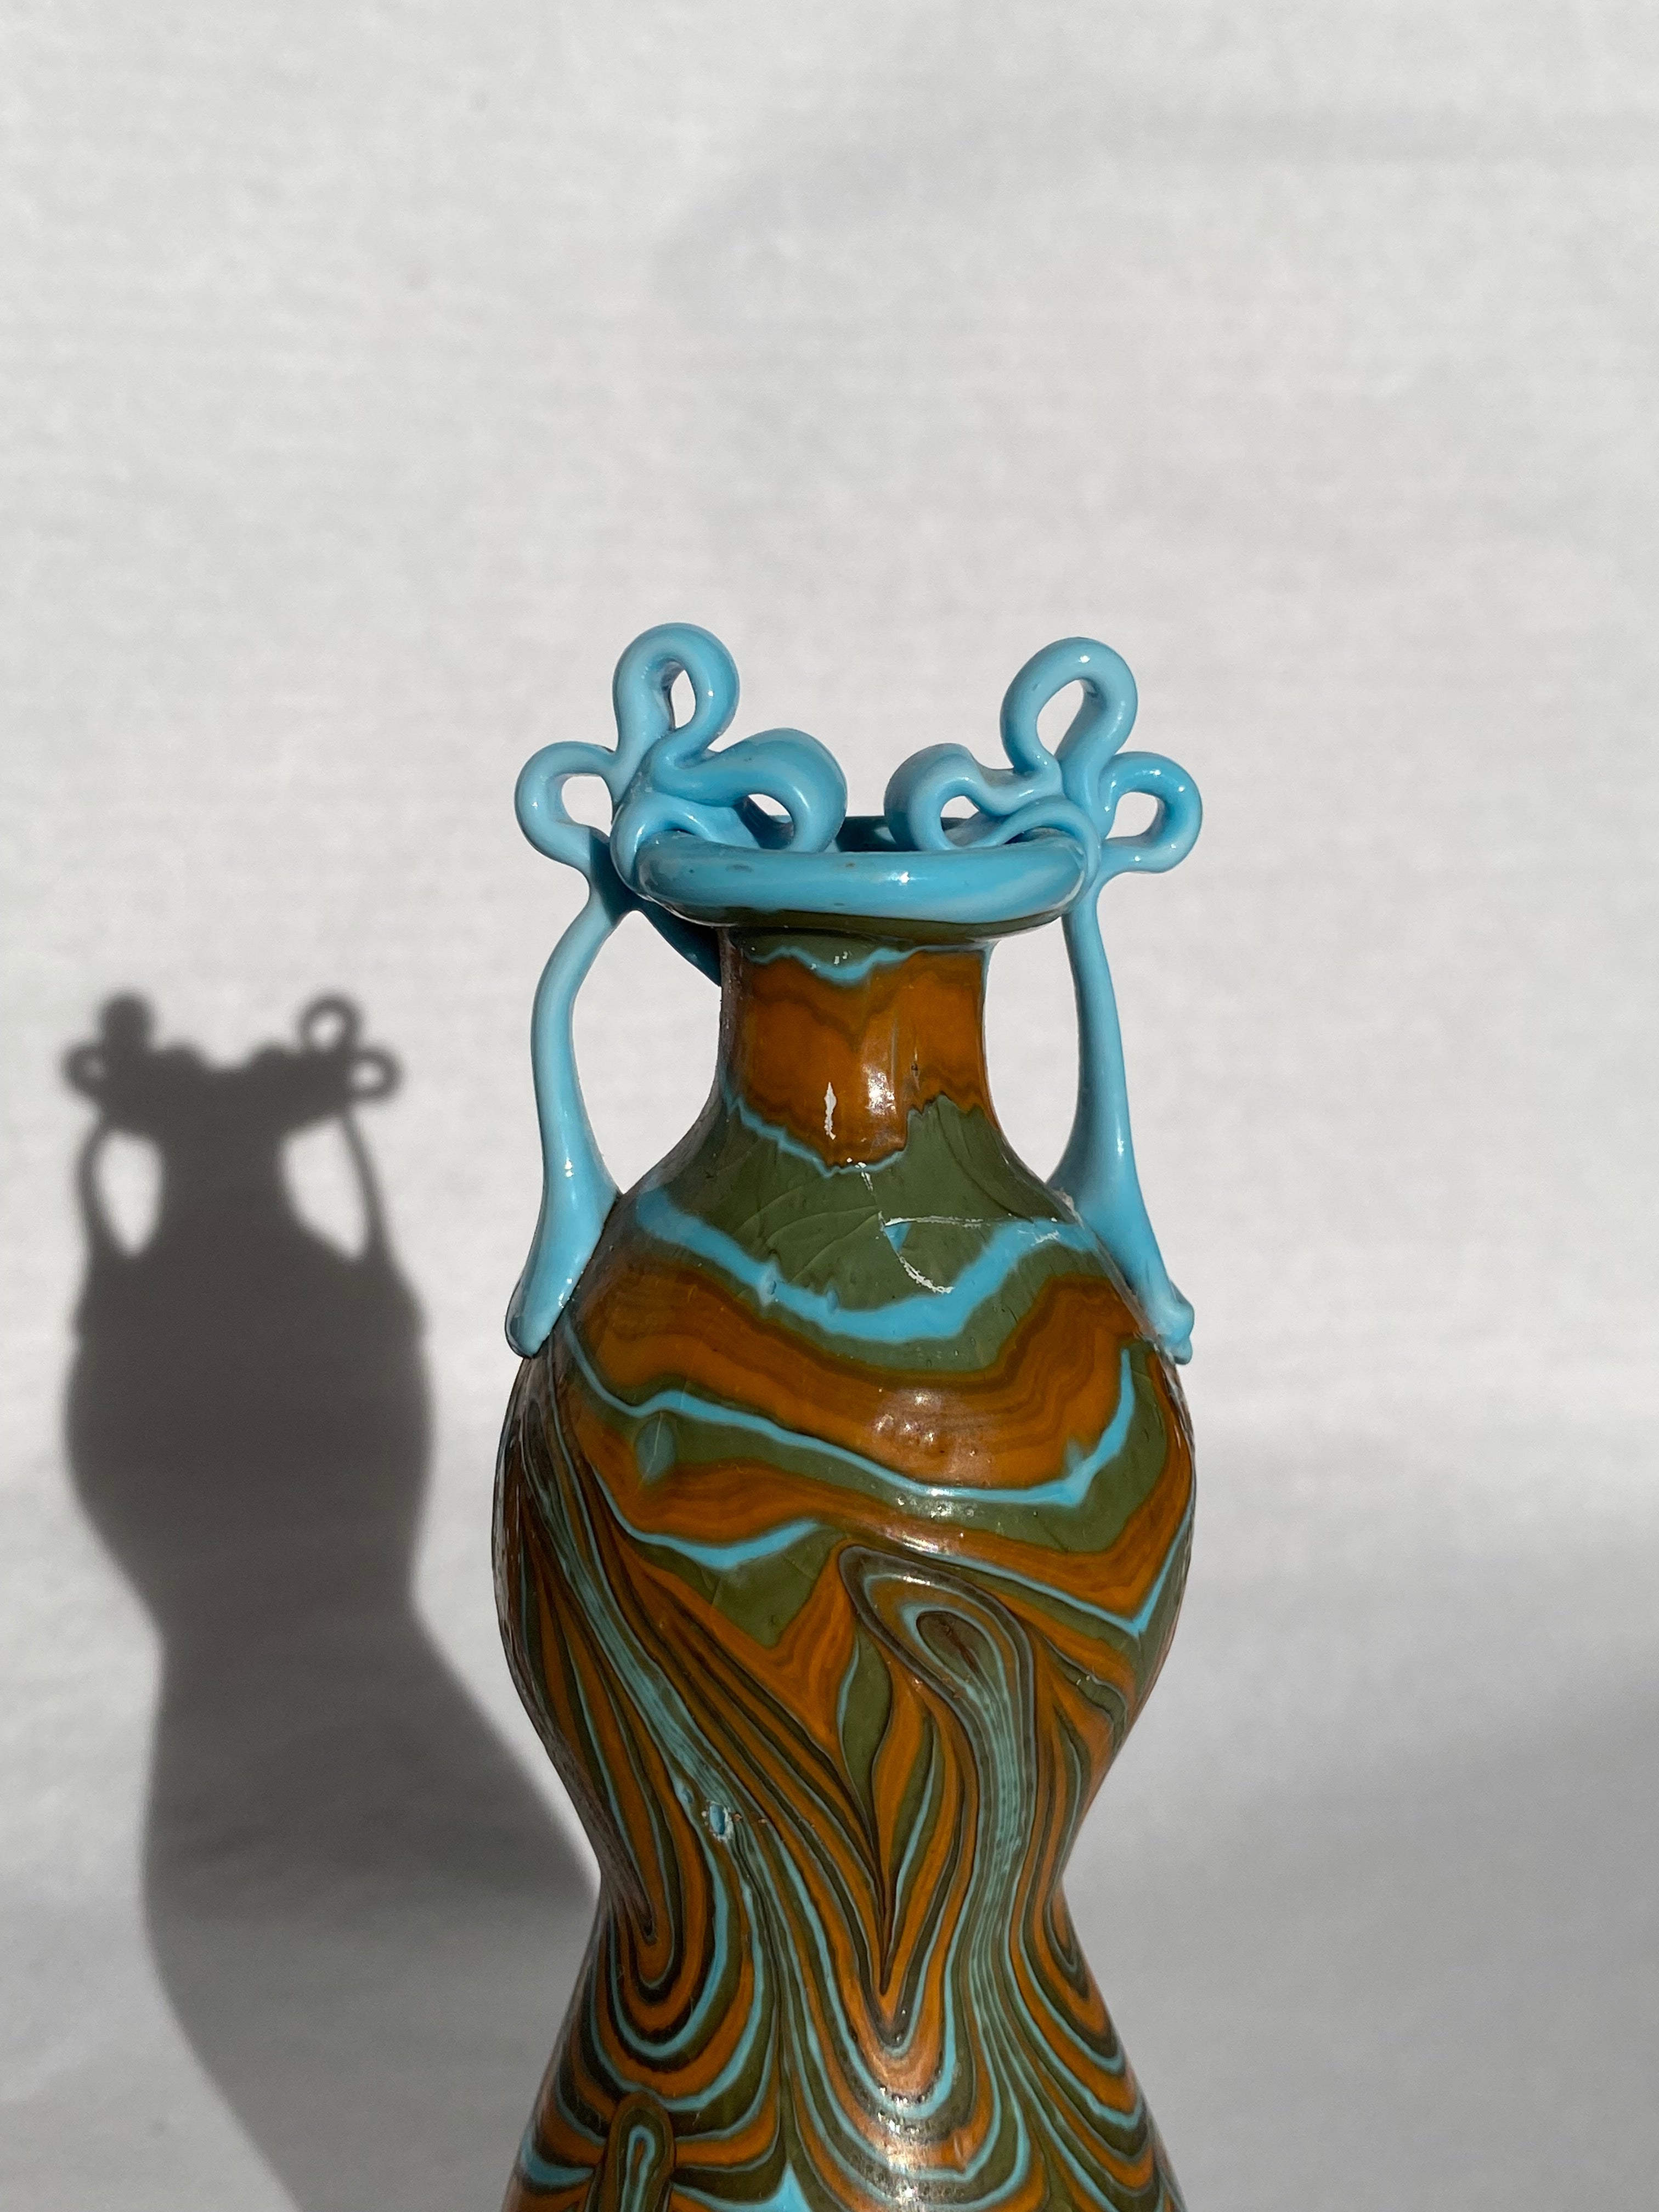 Phoenician glass vase - pale blue, orange and green